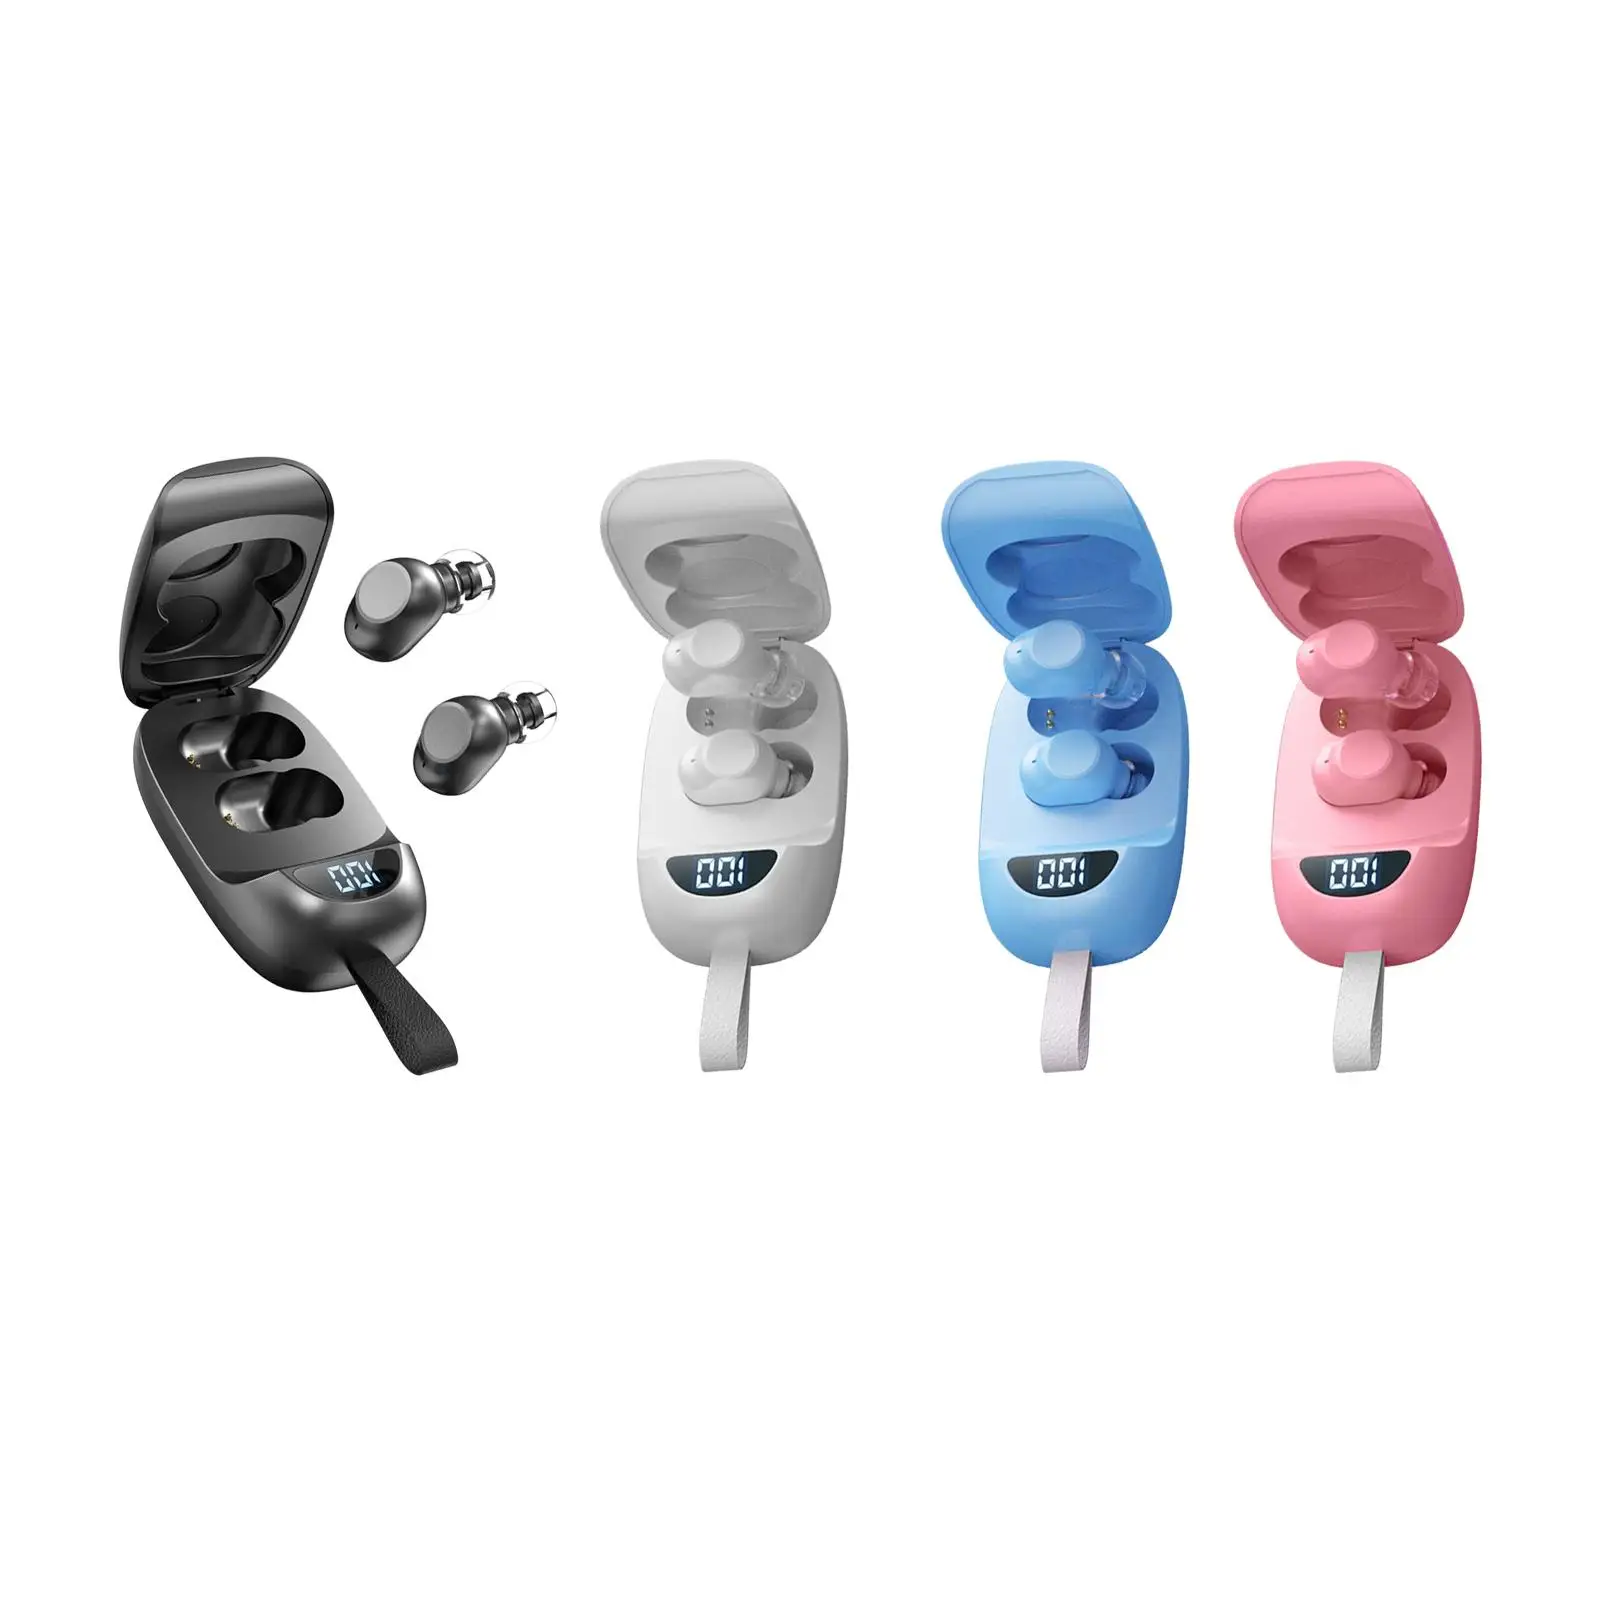 Wireless Earbuds V5.1 Power Display with Mic Waterproof Touch Control in Ear Stereo Earphones Headphones for Mobile Sport Phone